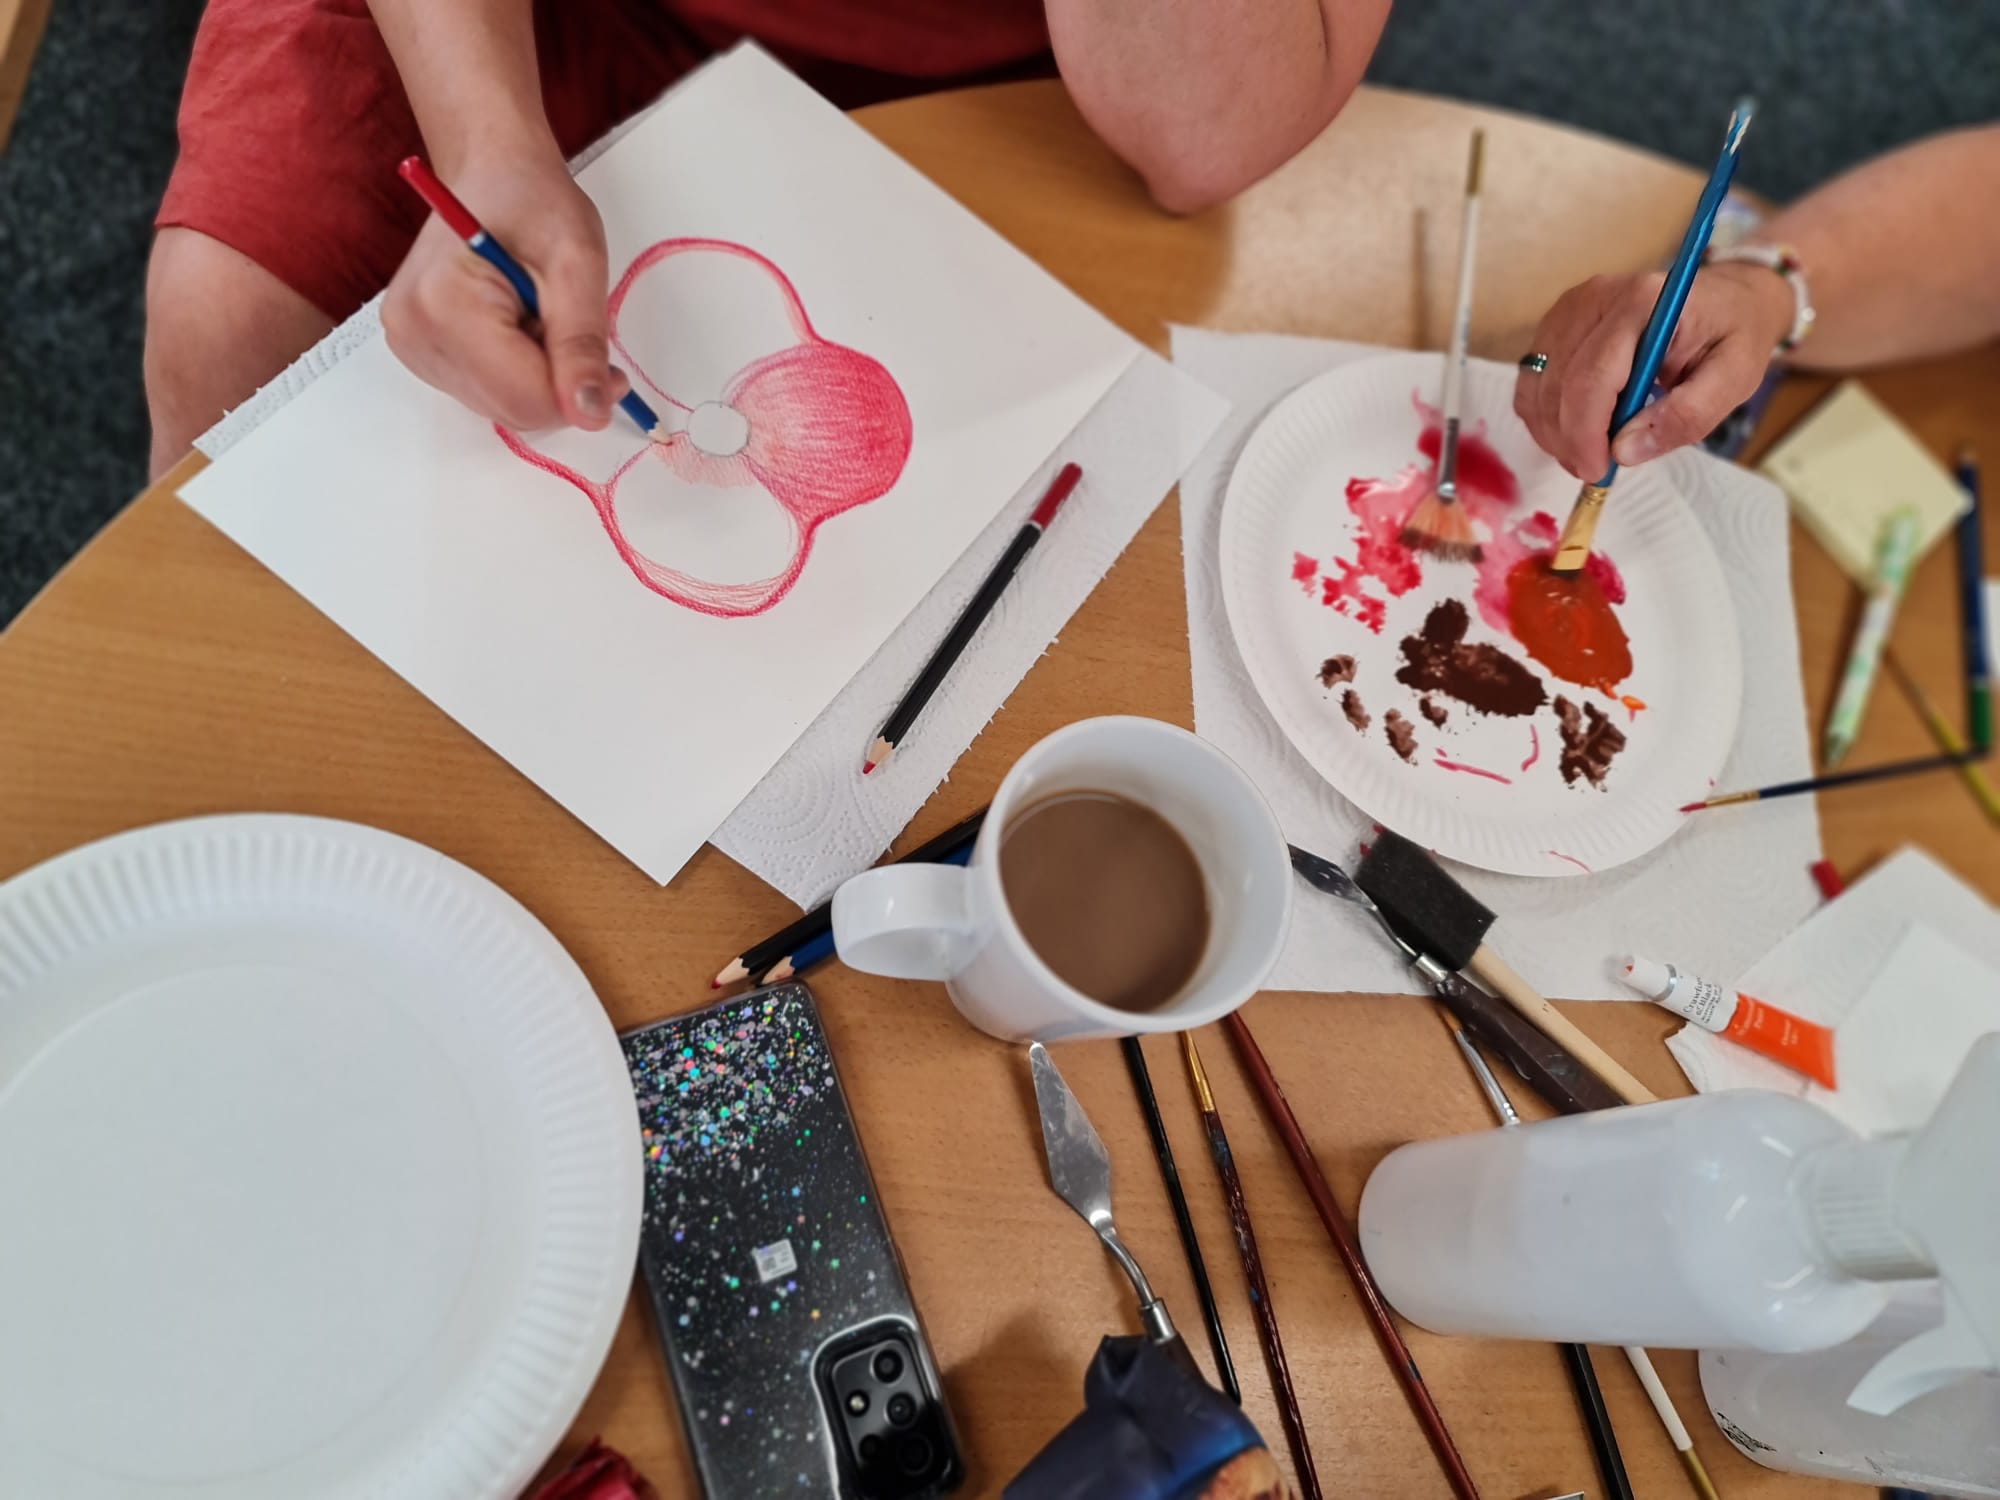 Table with art supplies and hands of two people, one painting a red poppy